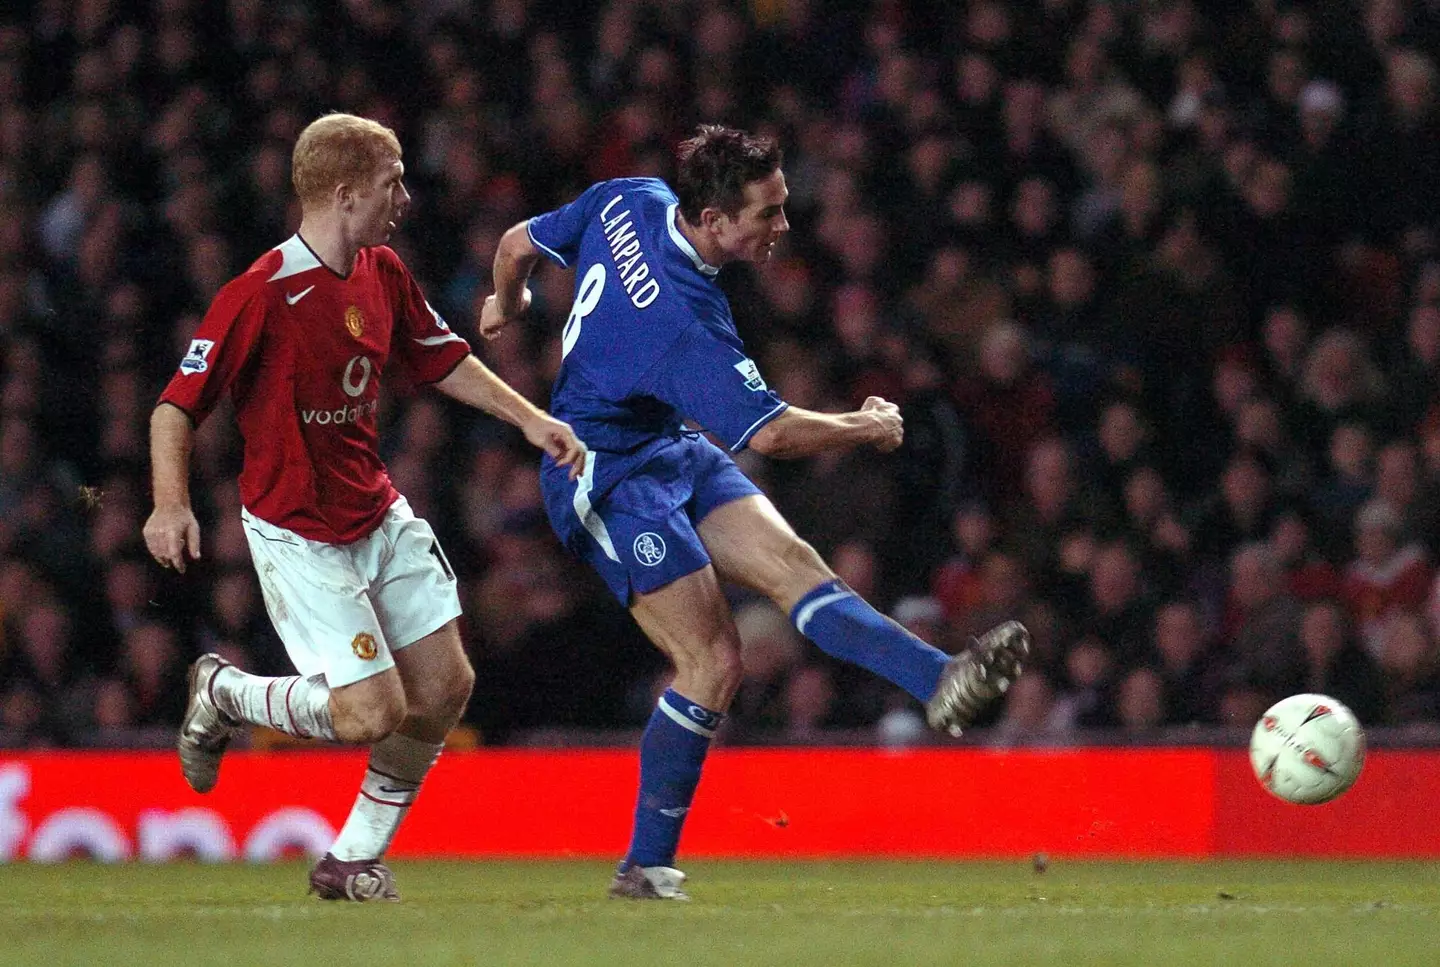 Lampard and Scholes playing against one another. (Image